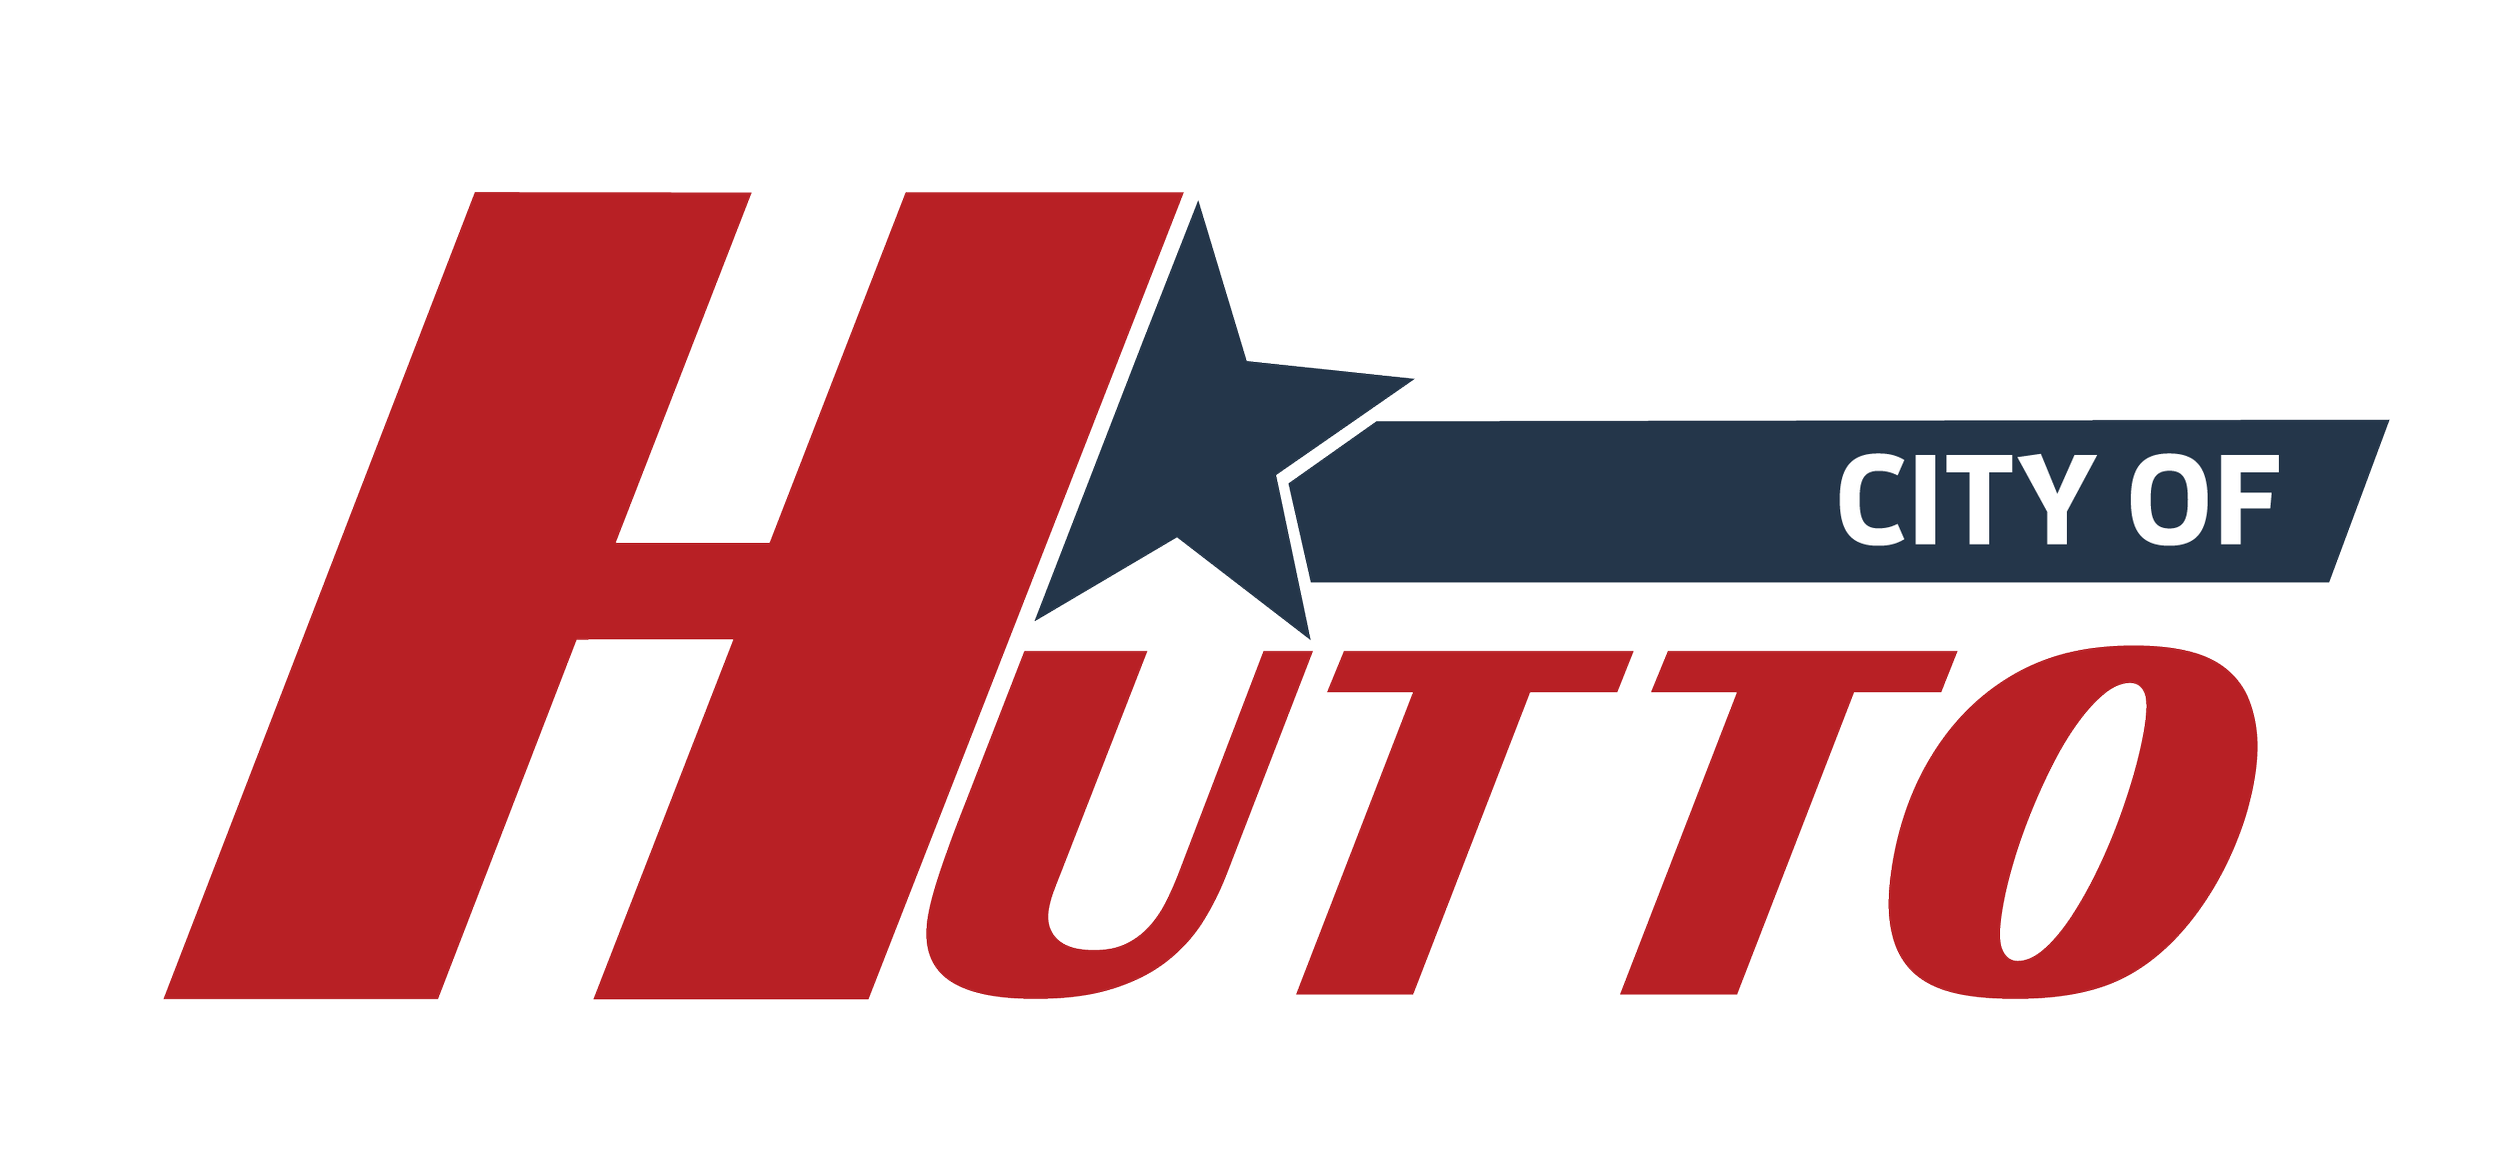 City of Hutto Logo - High Quality.png